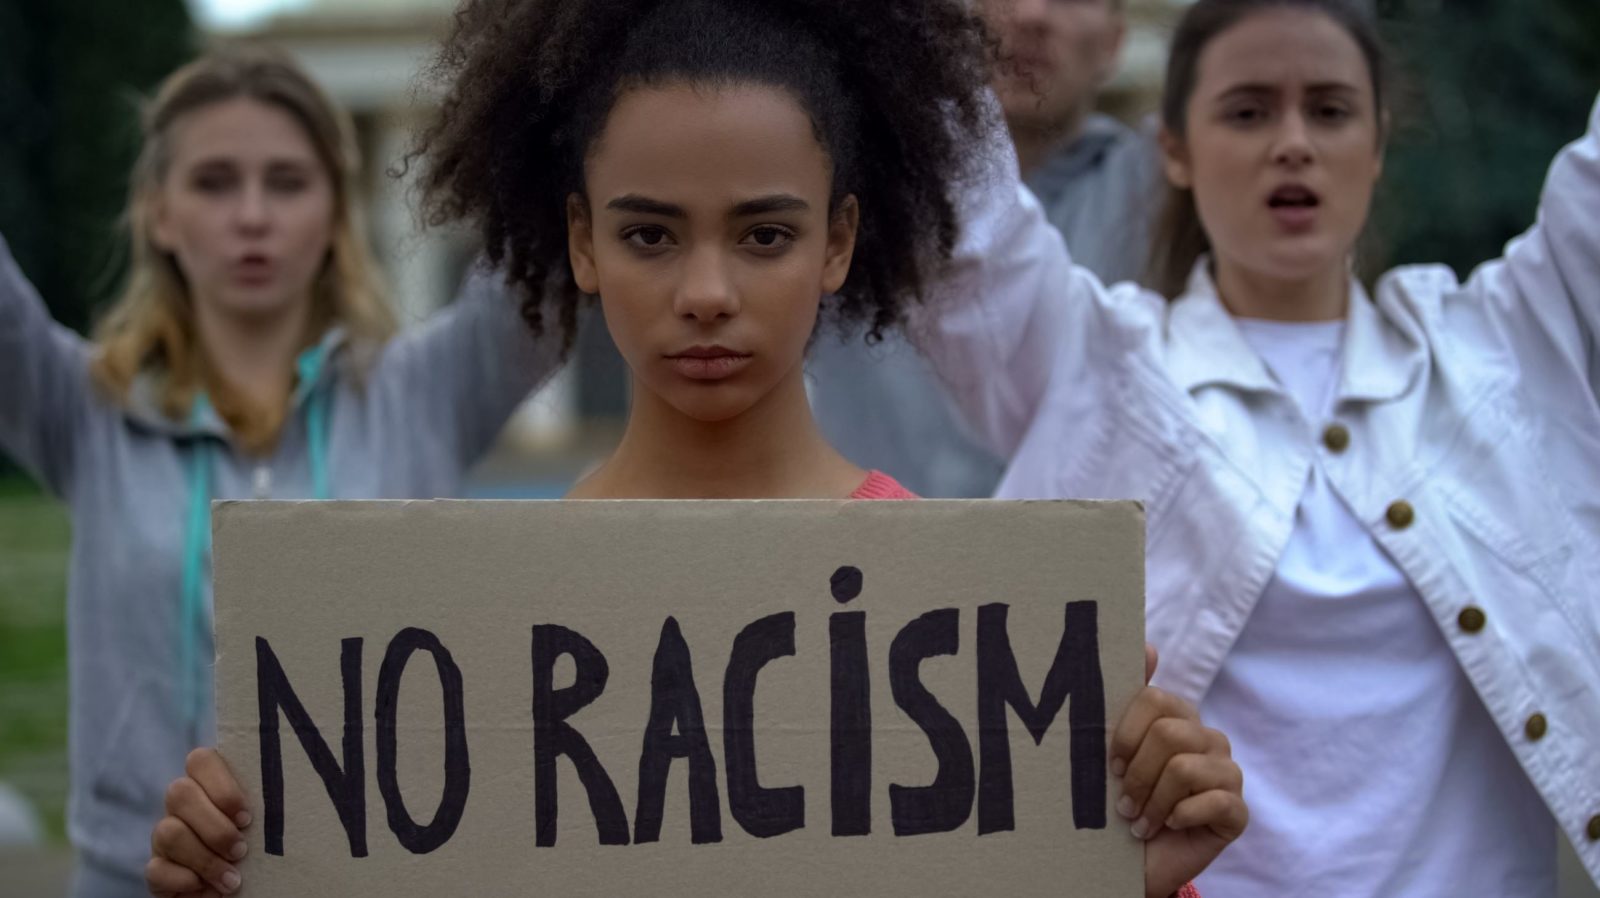 young Black person at a rally holds a sign that says "no racism"